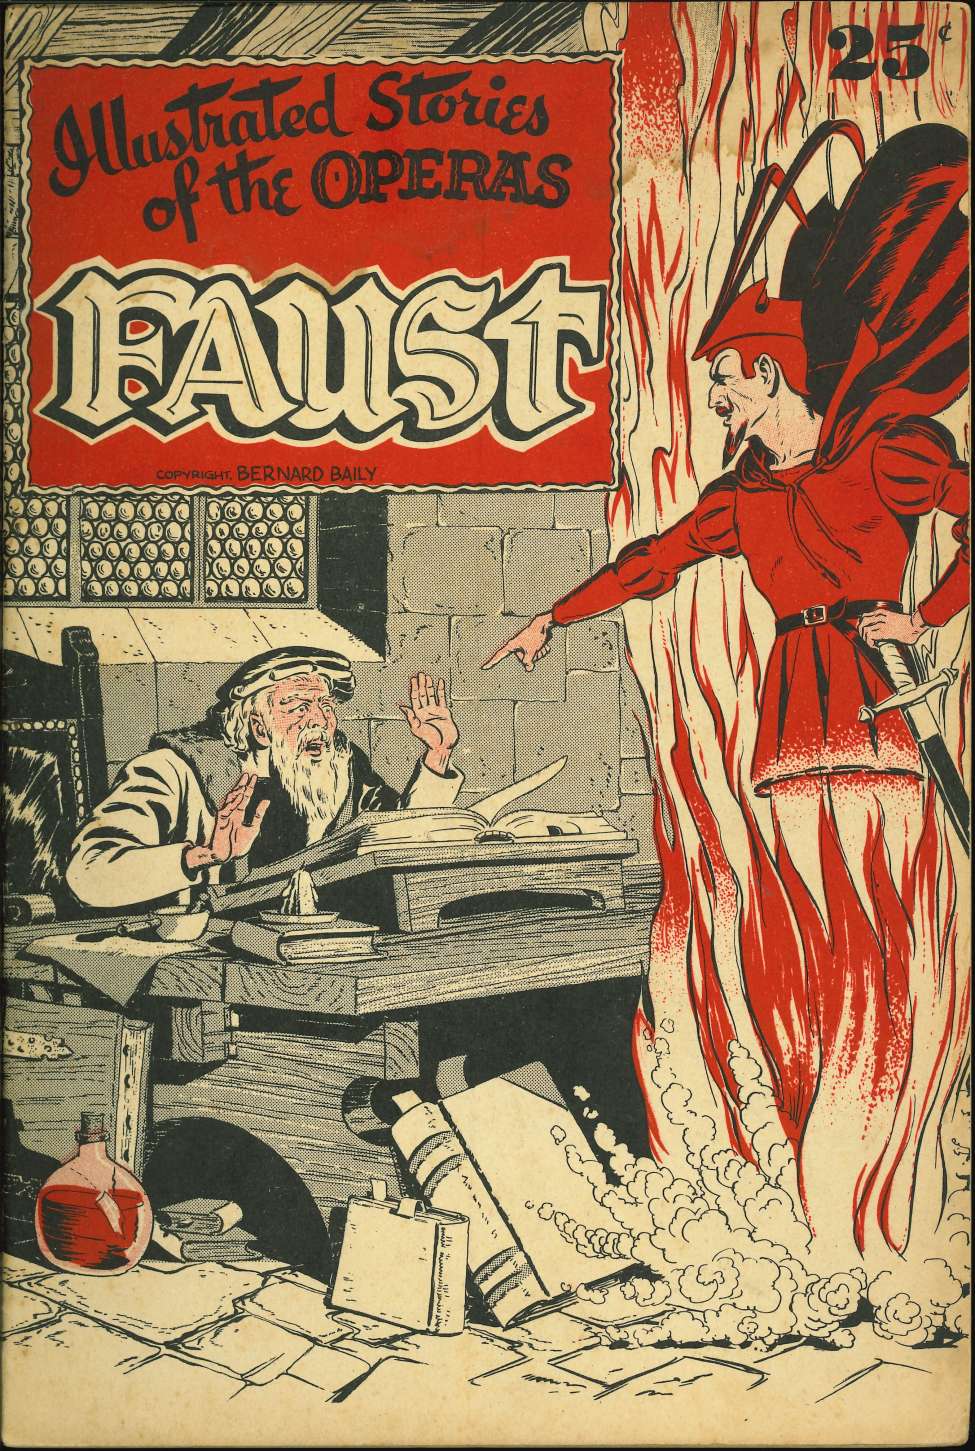 Book Cover For Illustrated Stories of the Operas: Faust